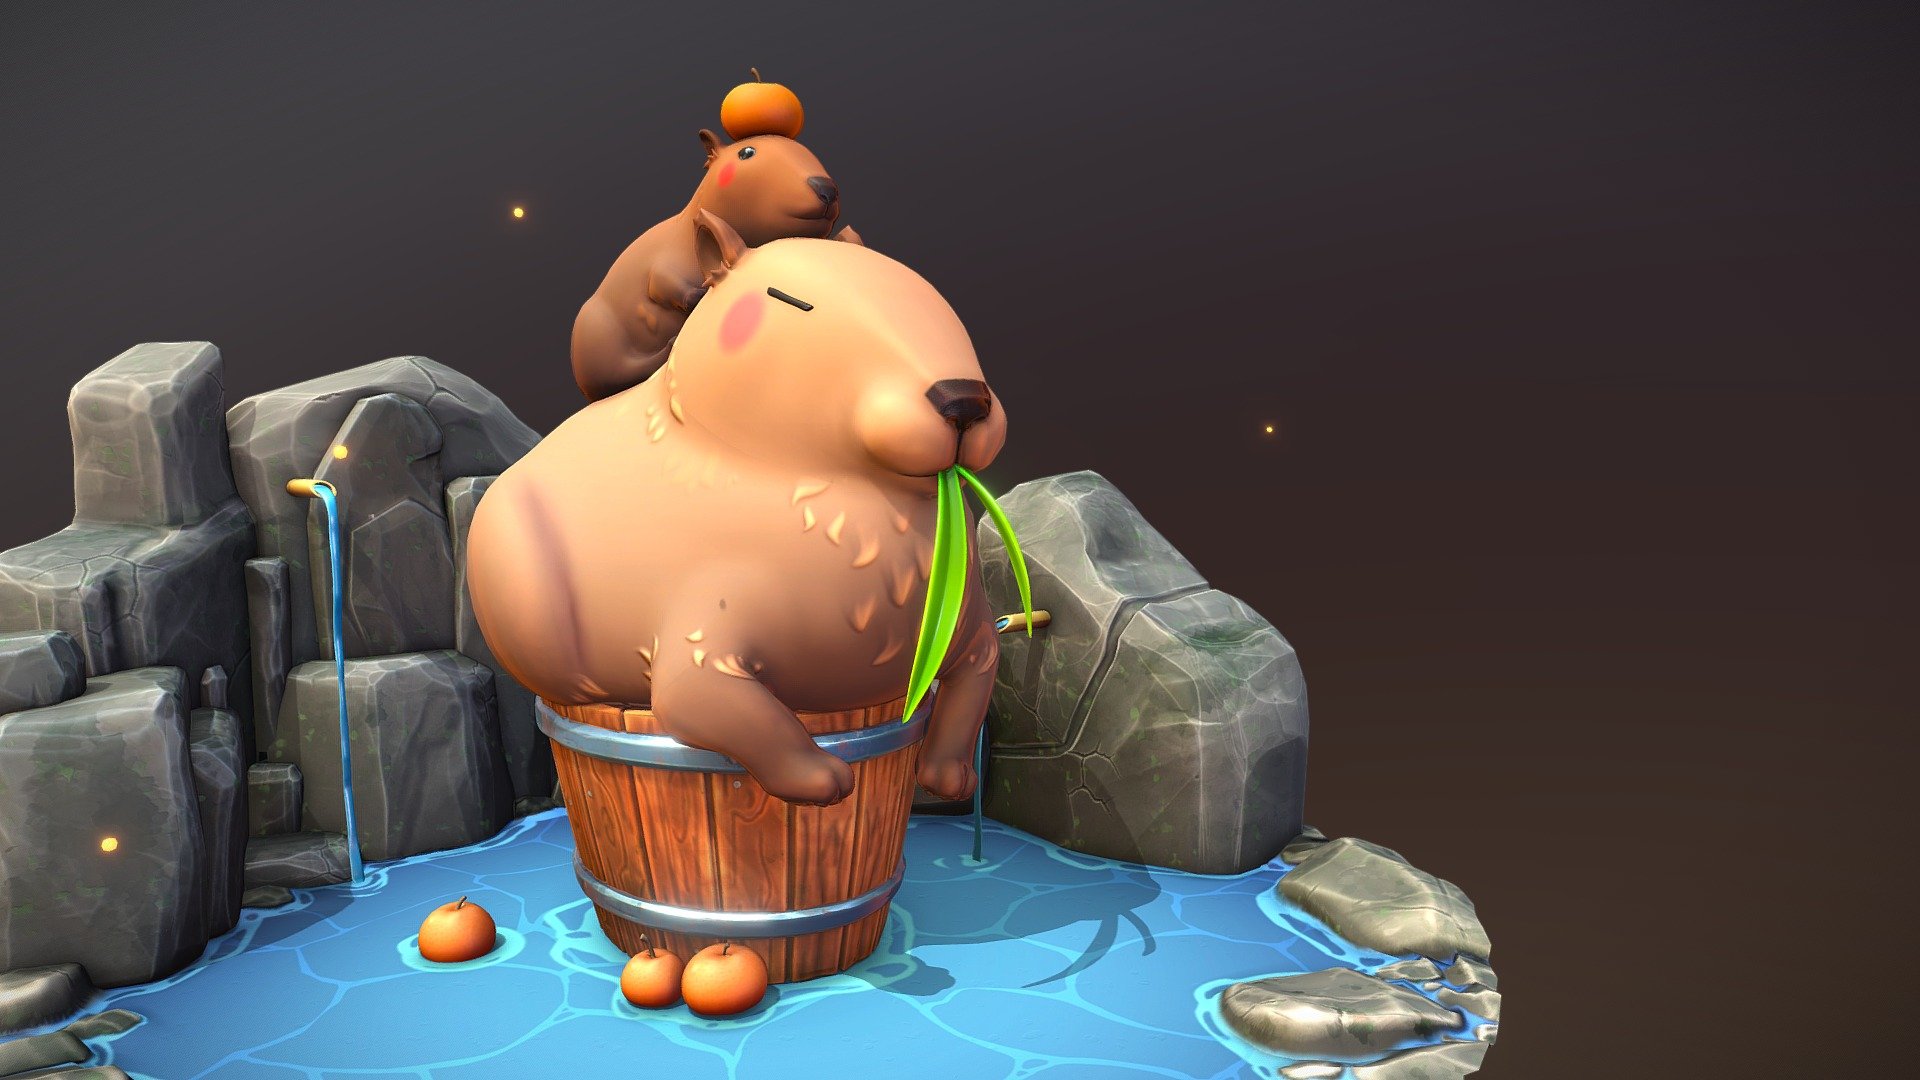 Capybaras chilling at a hot spring.

Blender sculpting assignment for university 3d model